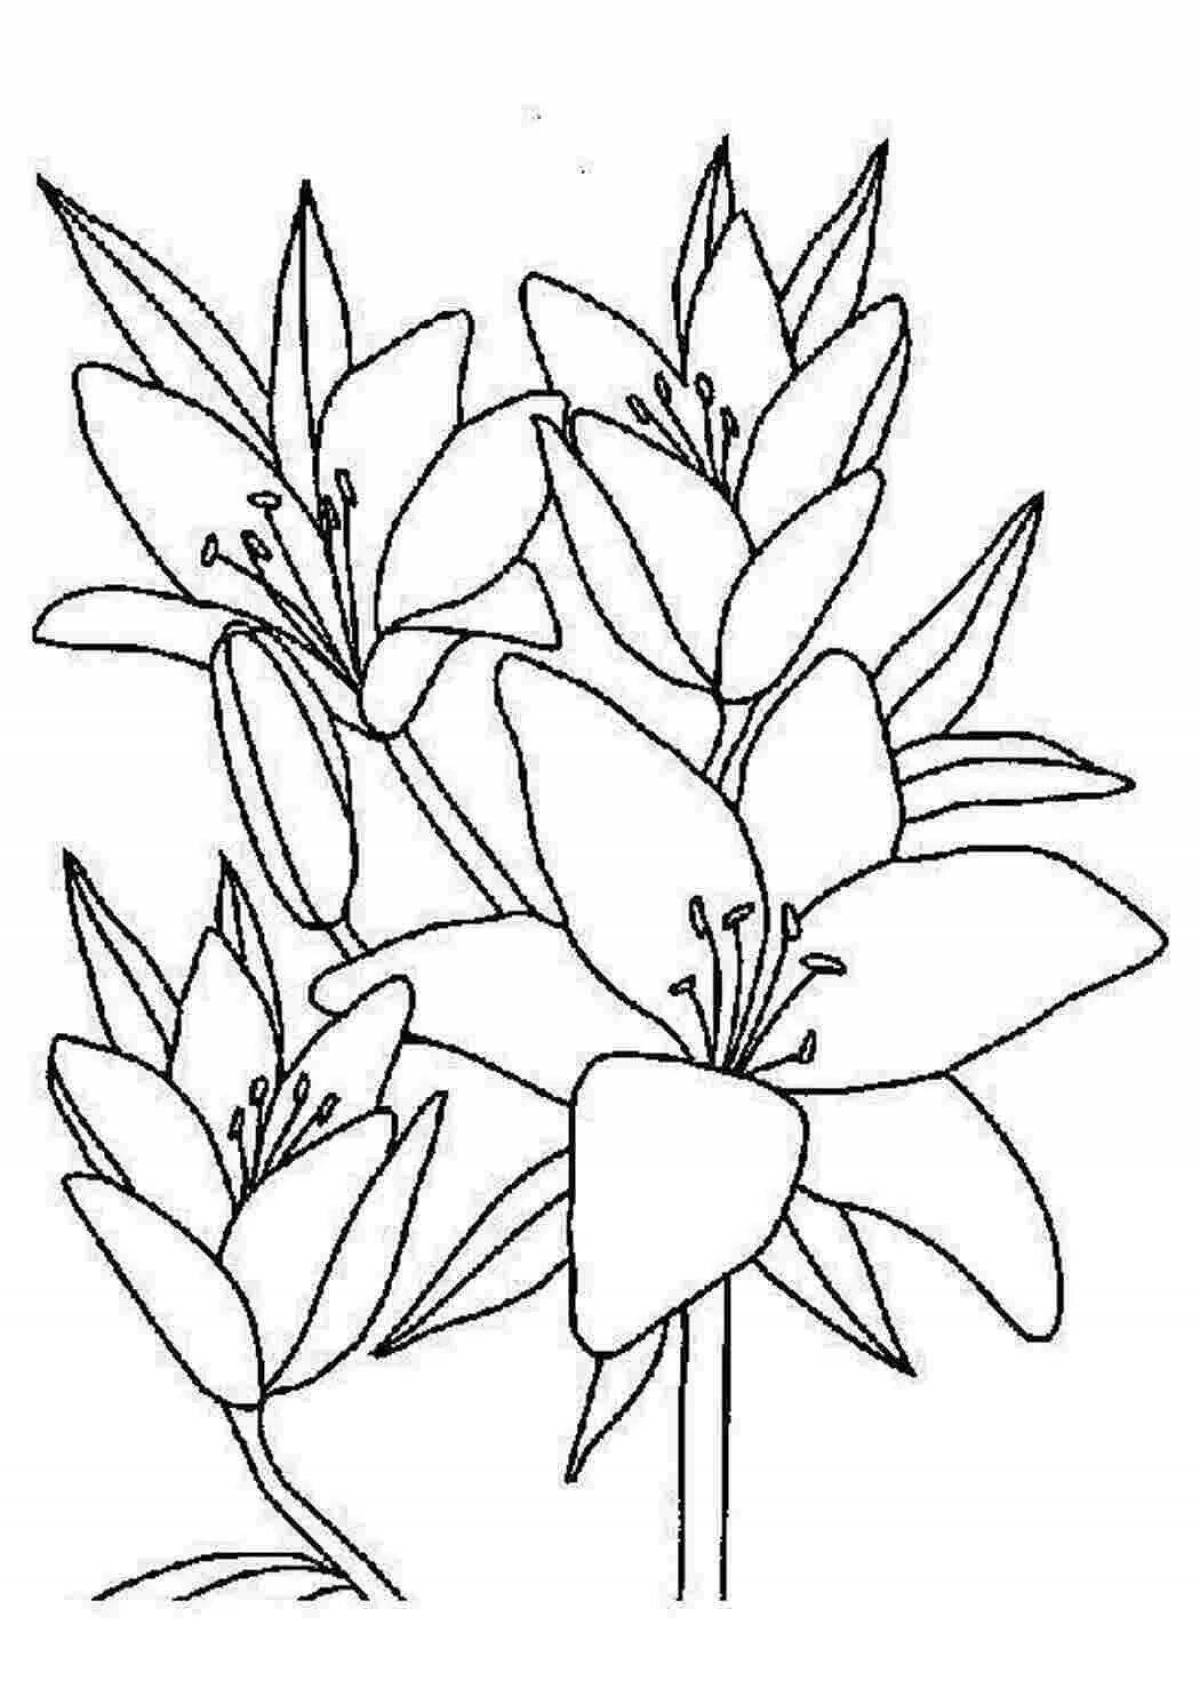 Delightful lily flower coloring page